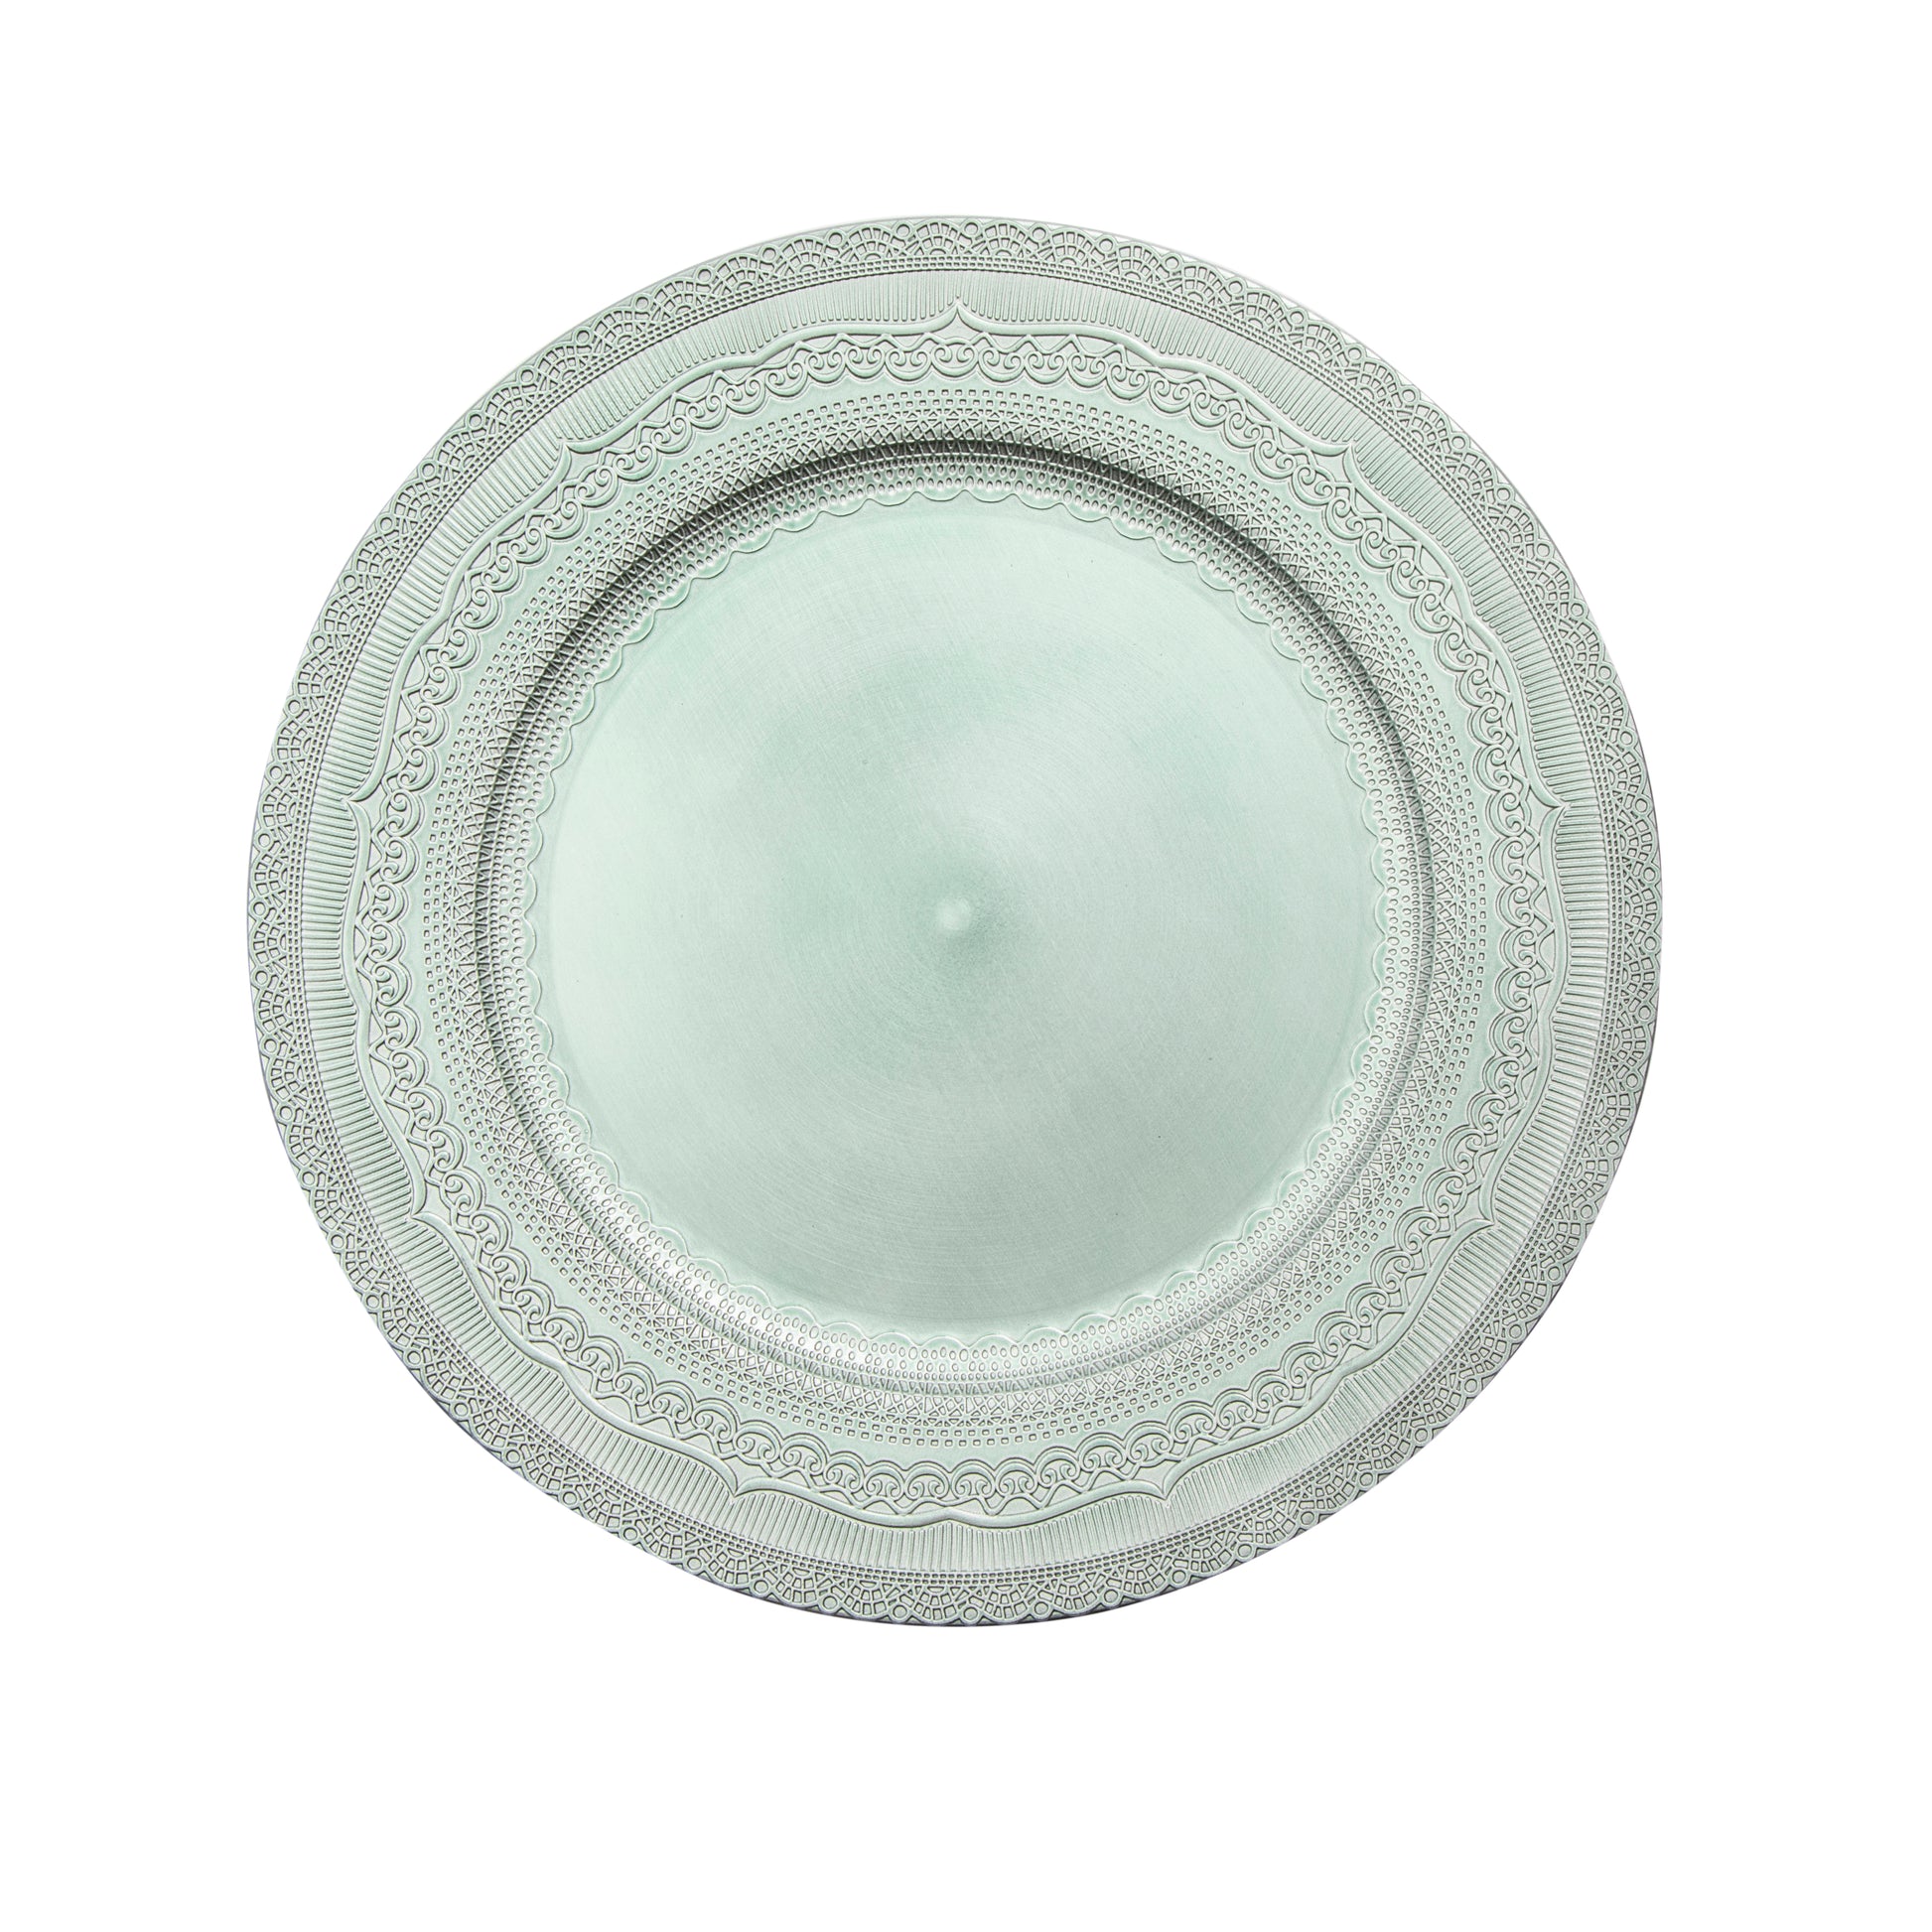 Lace Embossed Acrylic Plastic Charger Plate - Light Turquoise